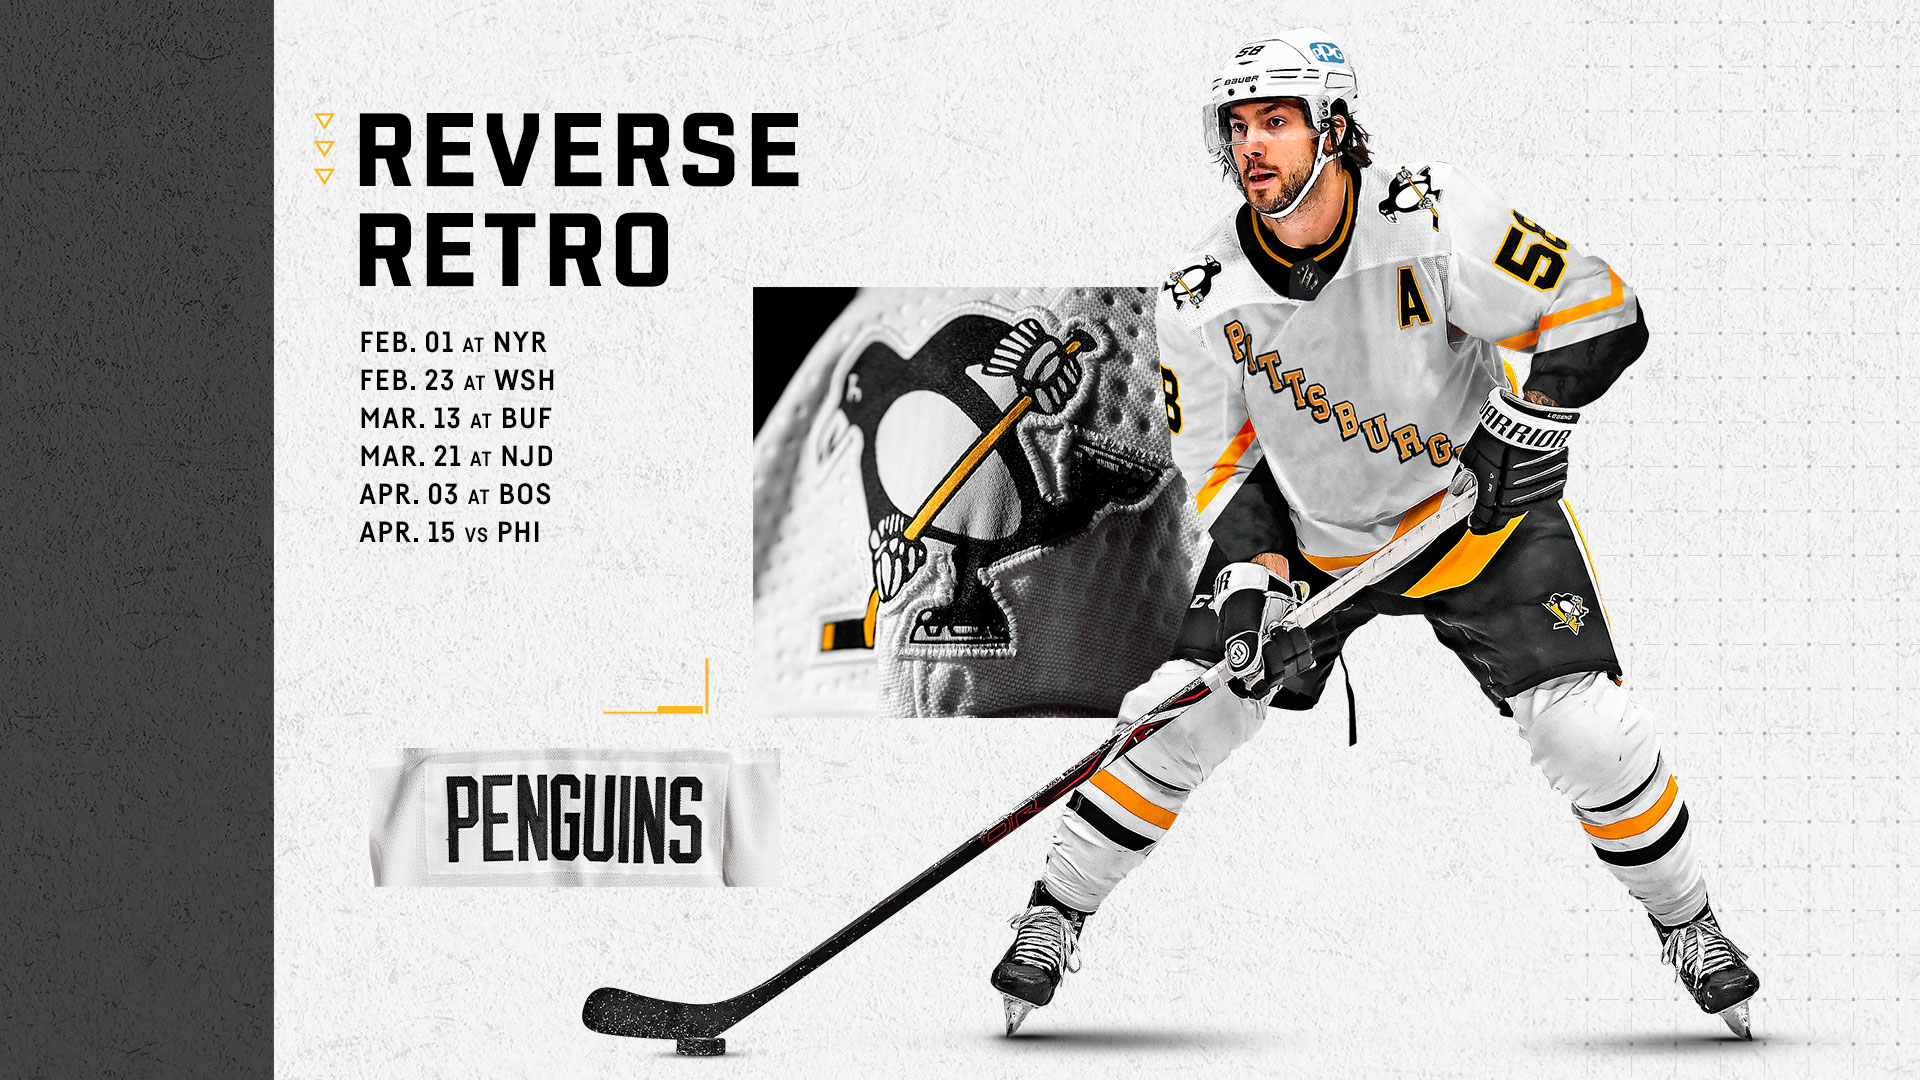 Pittsburgh Penguins Rejected Reverse Retro by JamieTrexHockey on DeviantArt